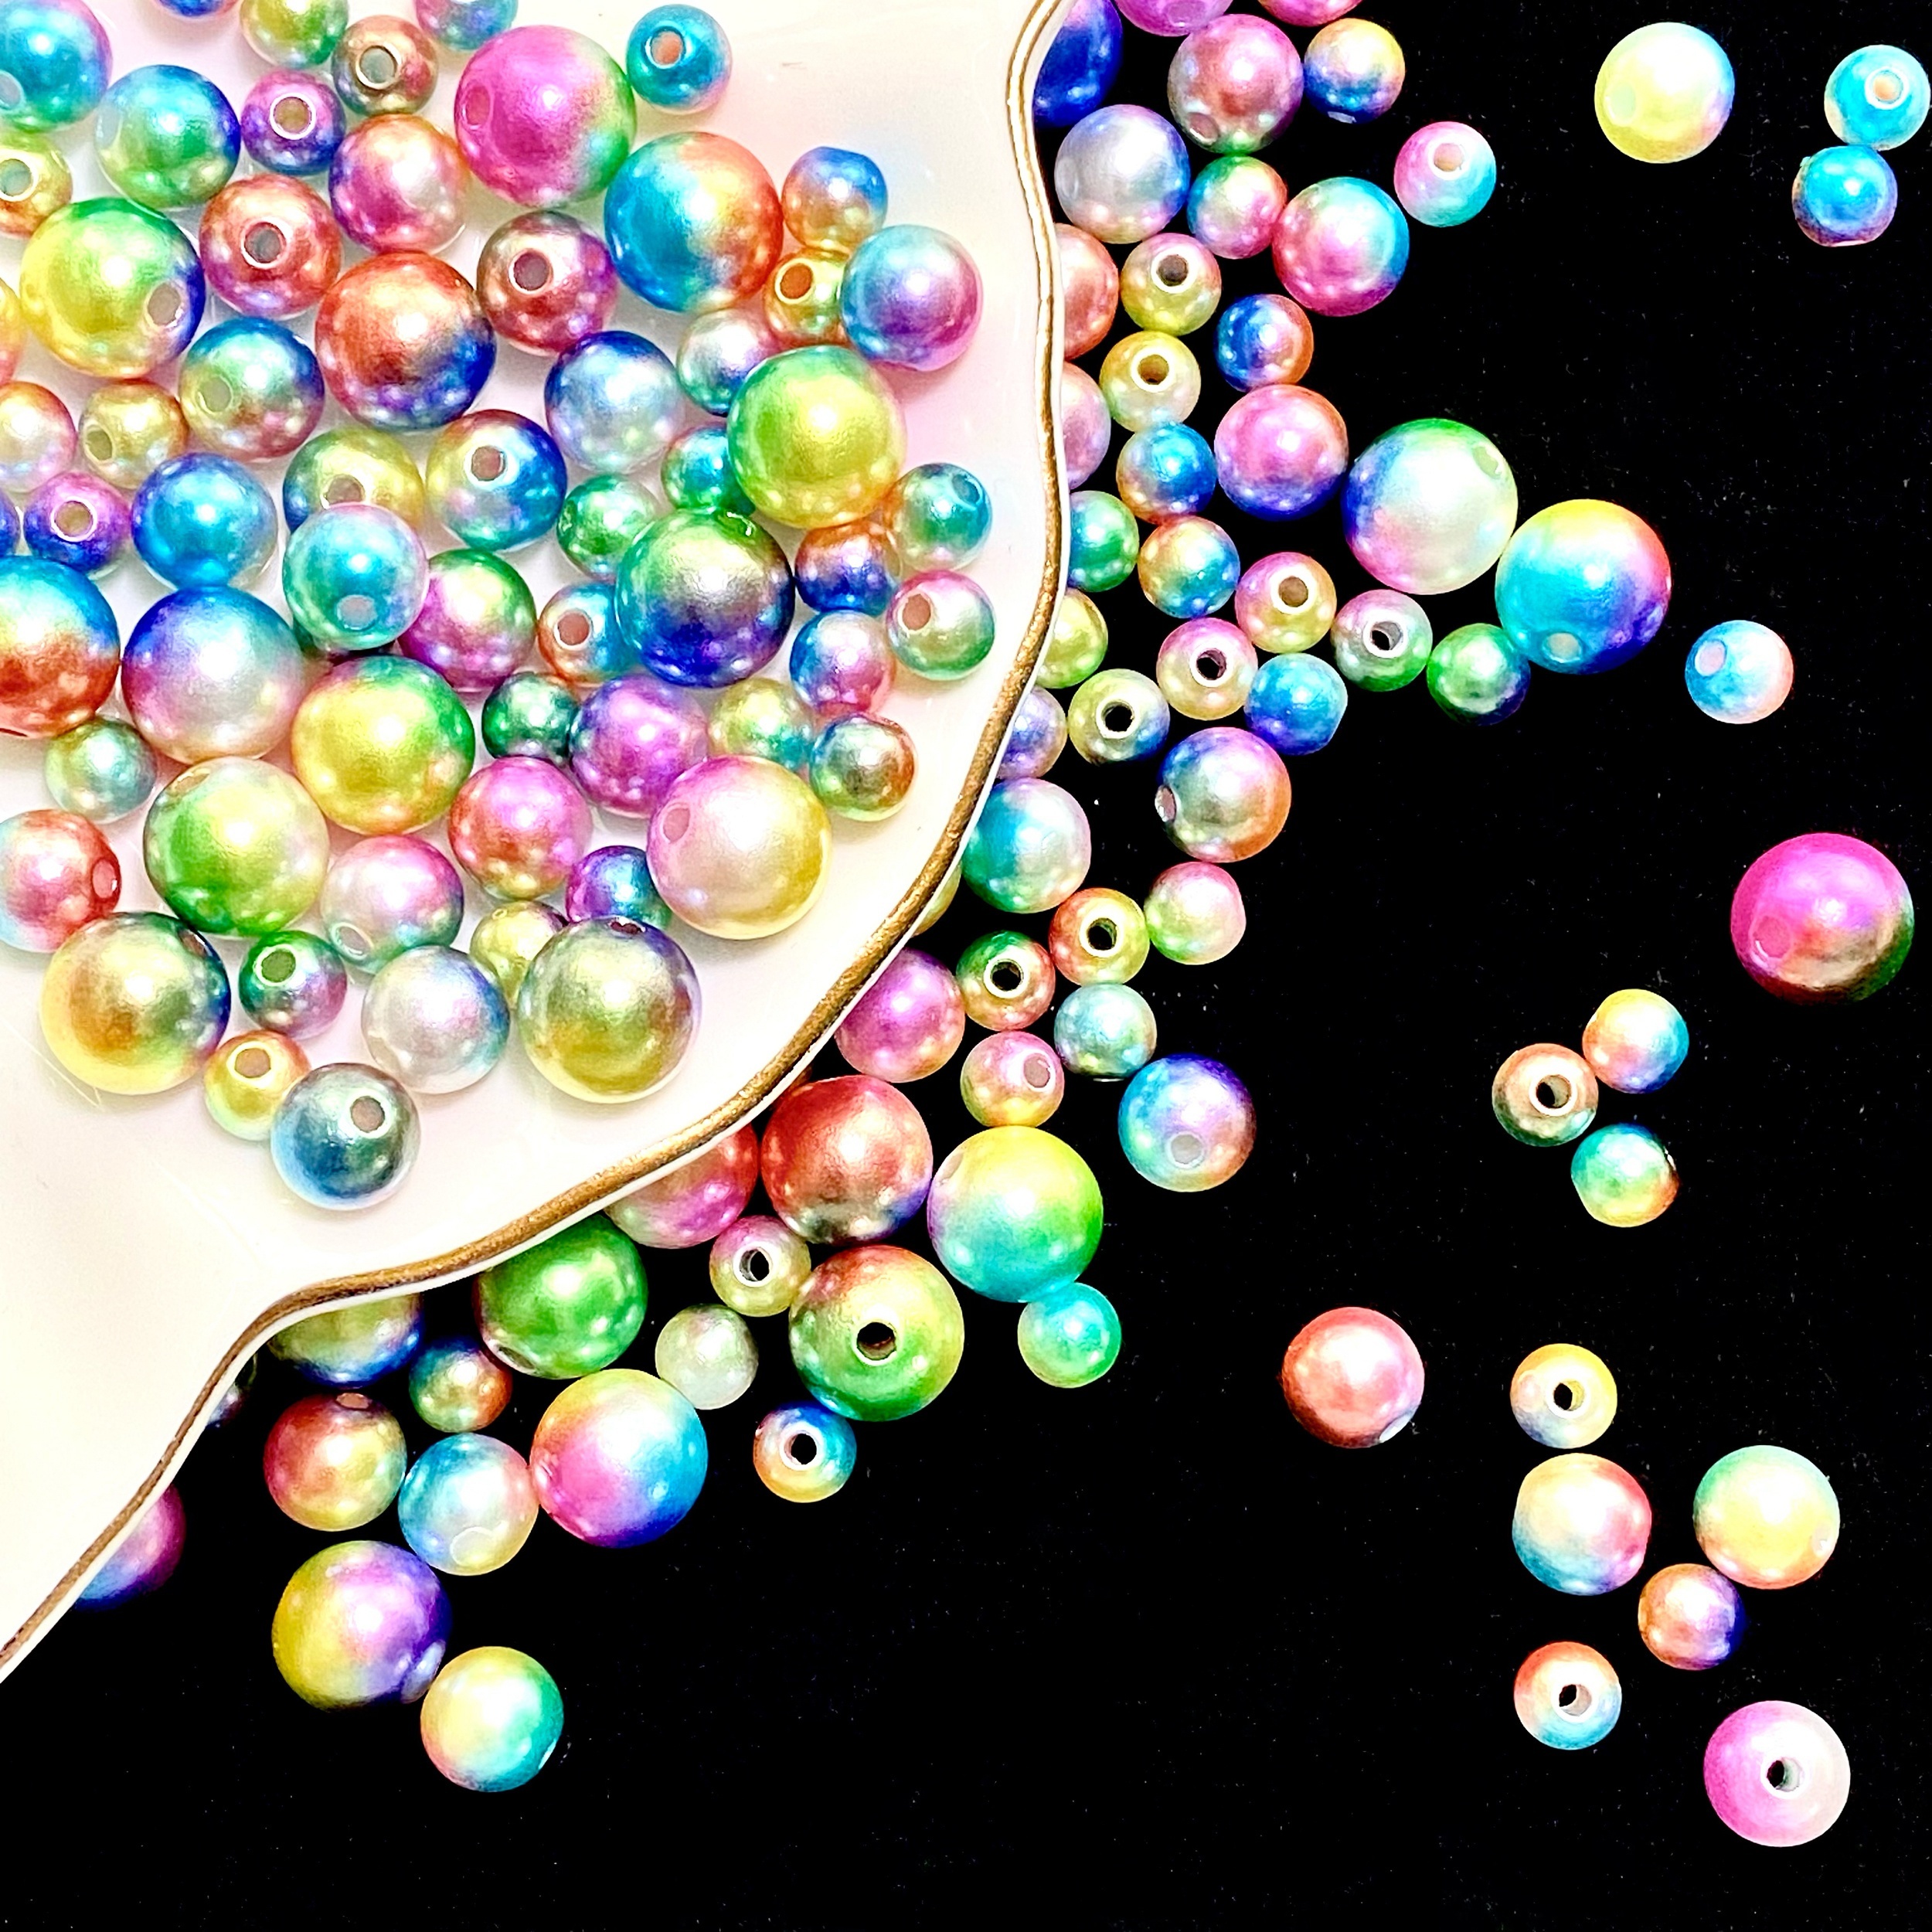 Non Toxic Water Beads Small and Large Jumbo Water Beads Rainbow